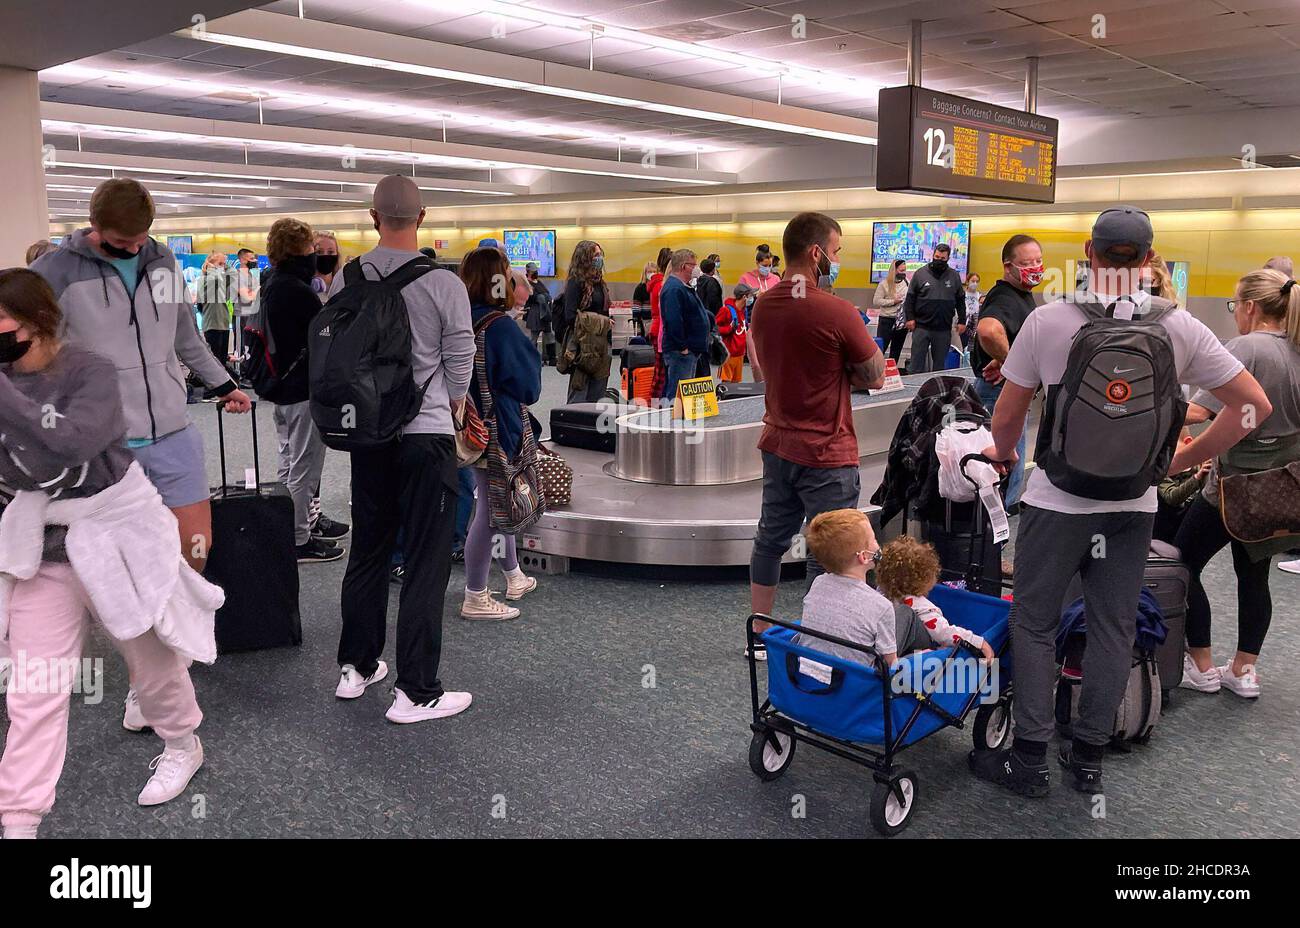 Travelers are seen waiting for their luggage at a baggage carousel at Orlando International Airport two days after Christmas. Due to flight crew shortages as a result of the COIVD-19 Omicron variant and due to other reasons, 760 flights to, from or within the US were canceled, and another 930 were delayed on December 27, 2021. Due to flight crew shortages as a result of the COIVD-19 Omicron variant and due to other reasons, 760 flights to, from or within the US were canceled and another 930 were delayed on December 27, 2021. Stock Photo